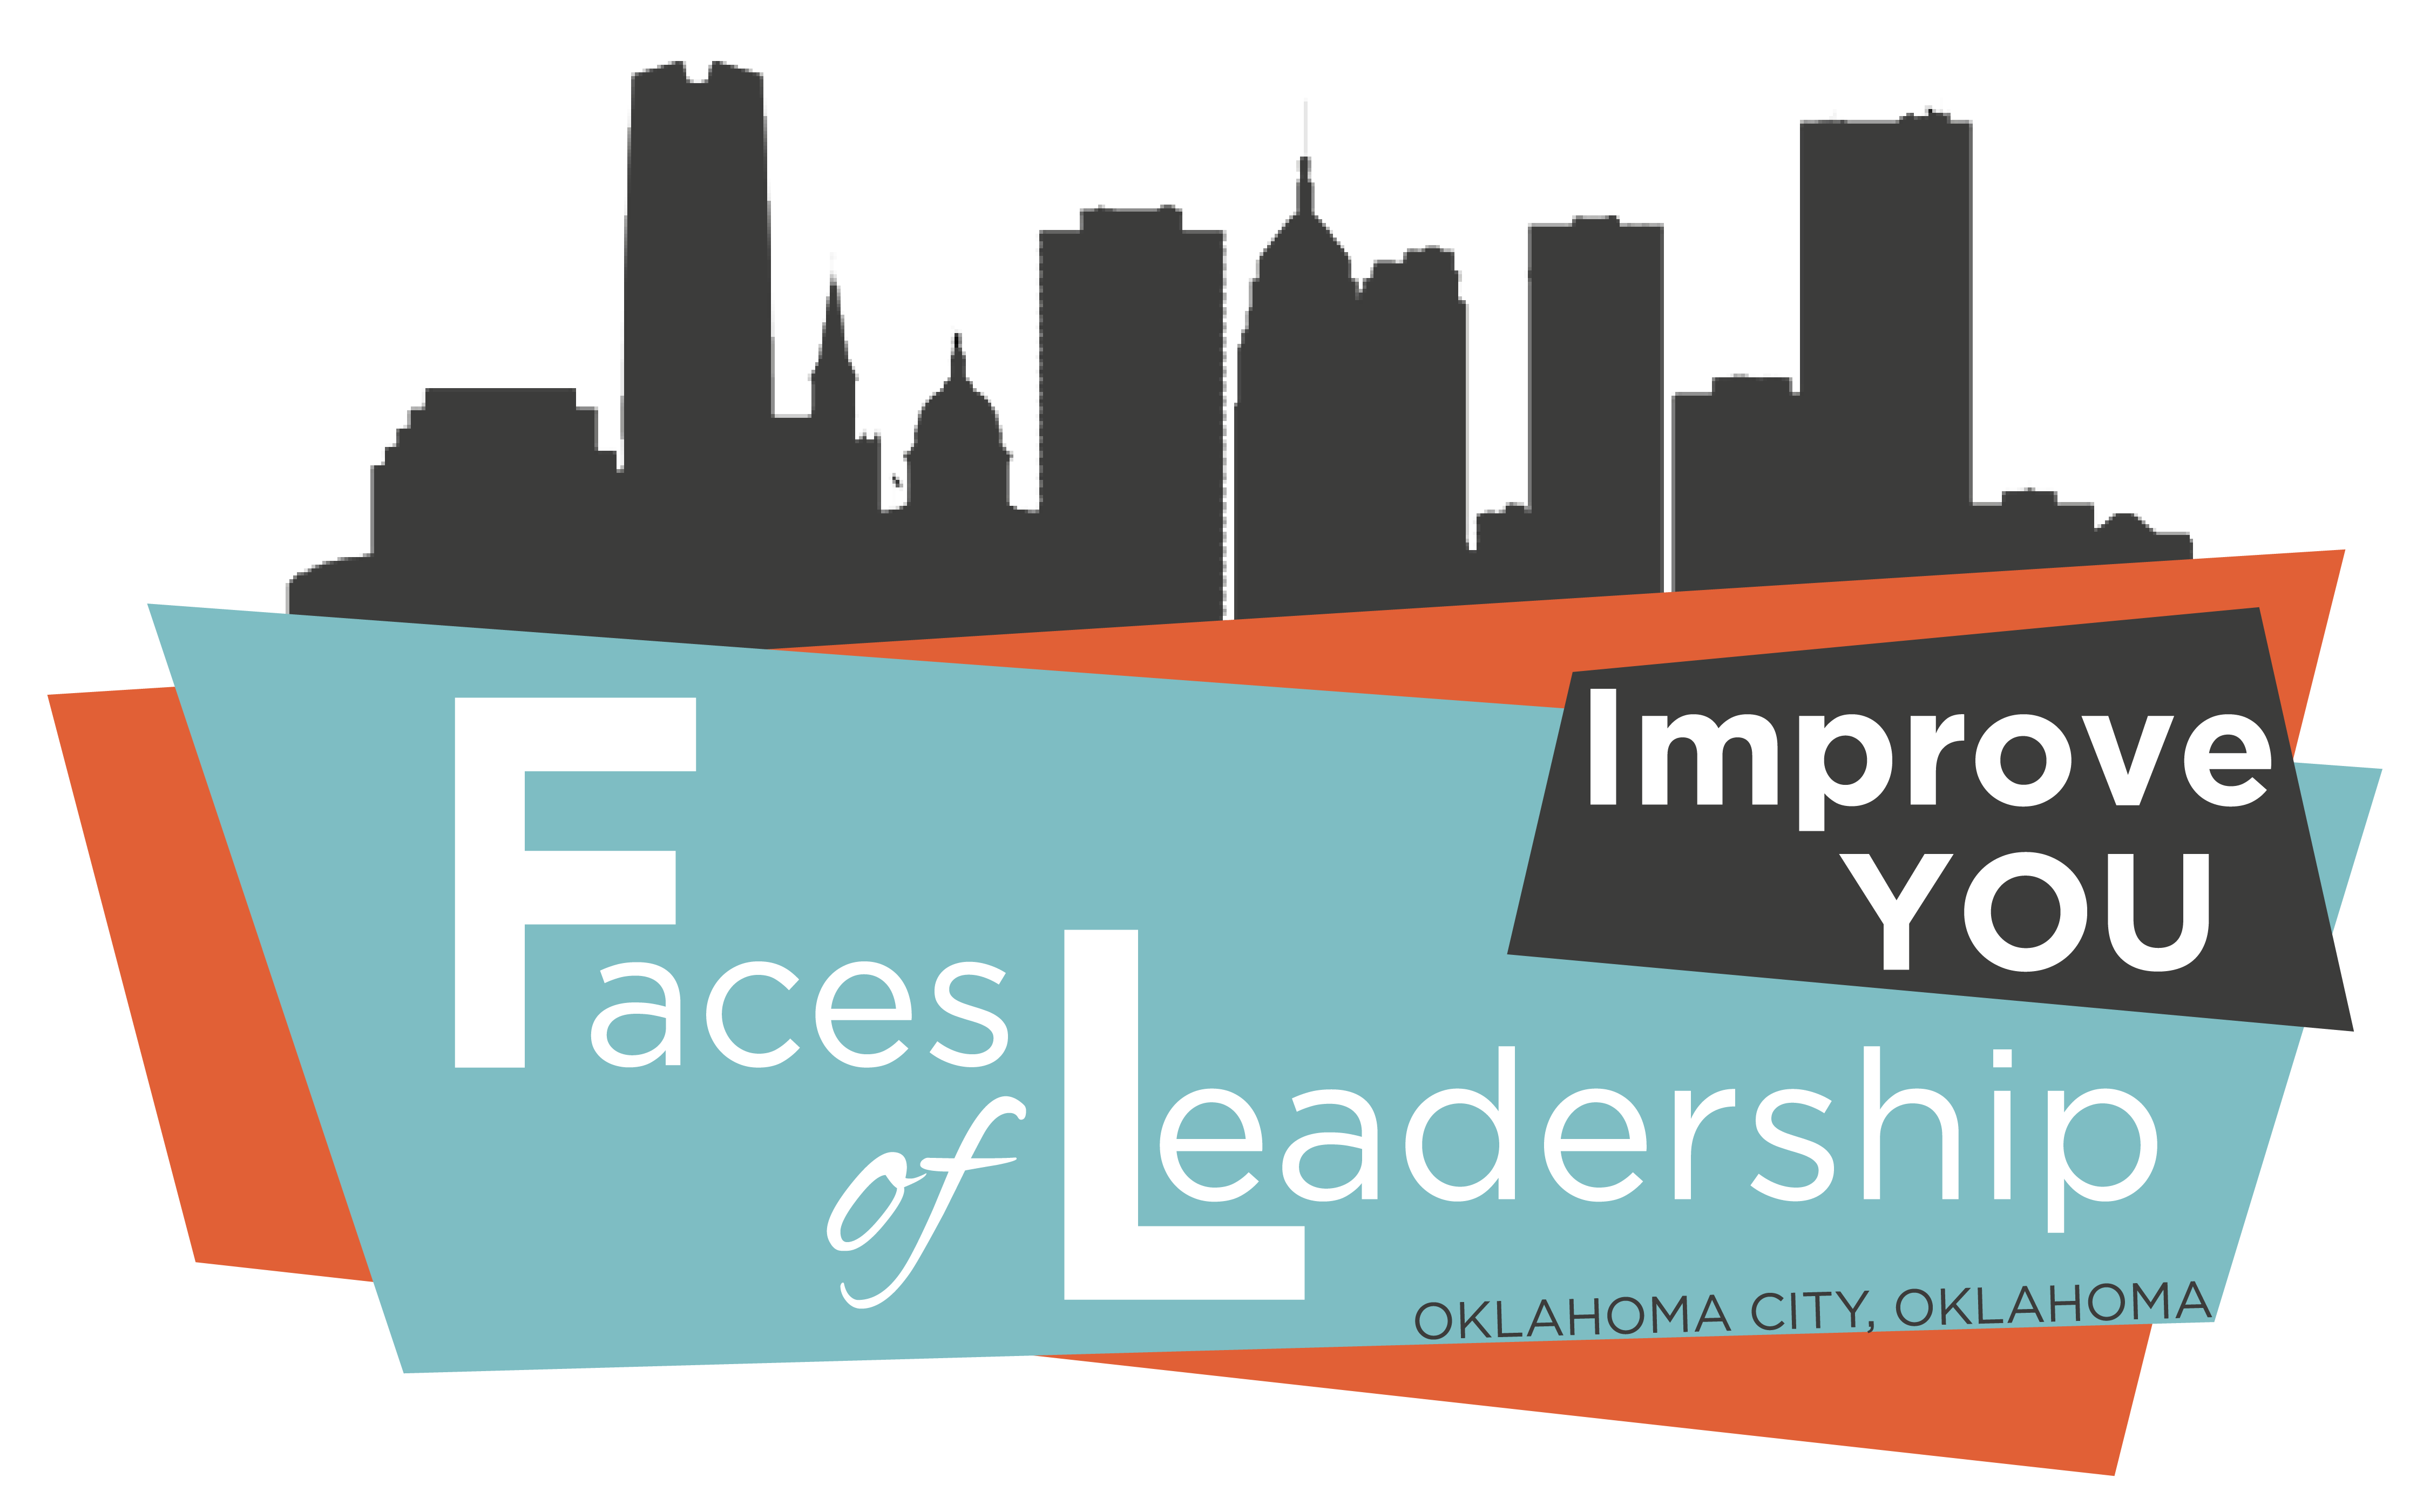 2021 FACES OF LEADERSHIP CONFERENCE RELOCATES FROM OHIO TO OKLAHOMA